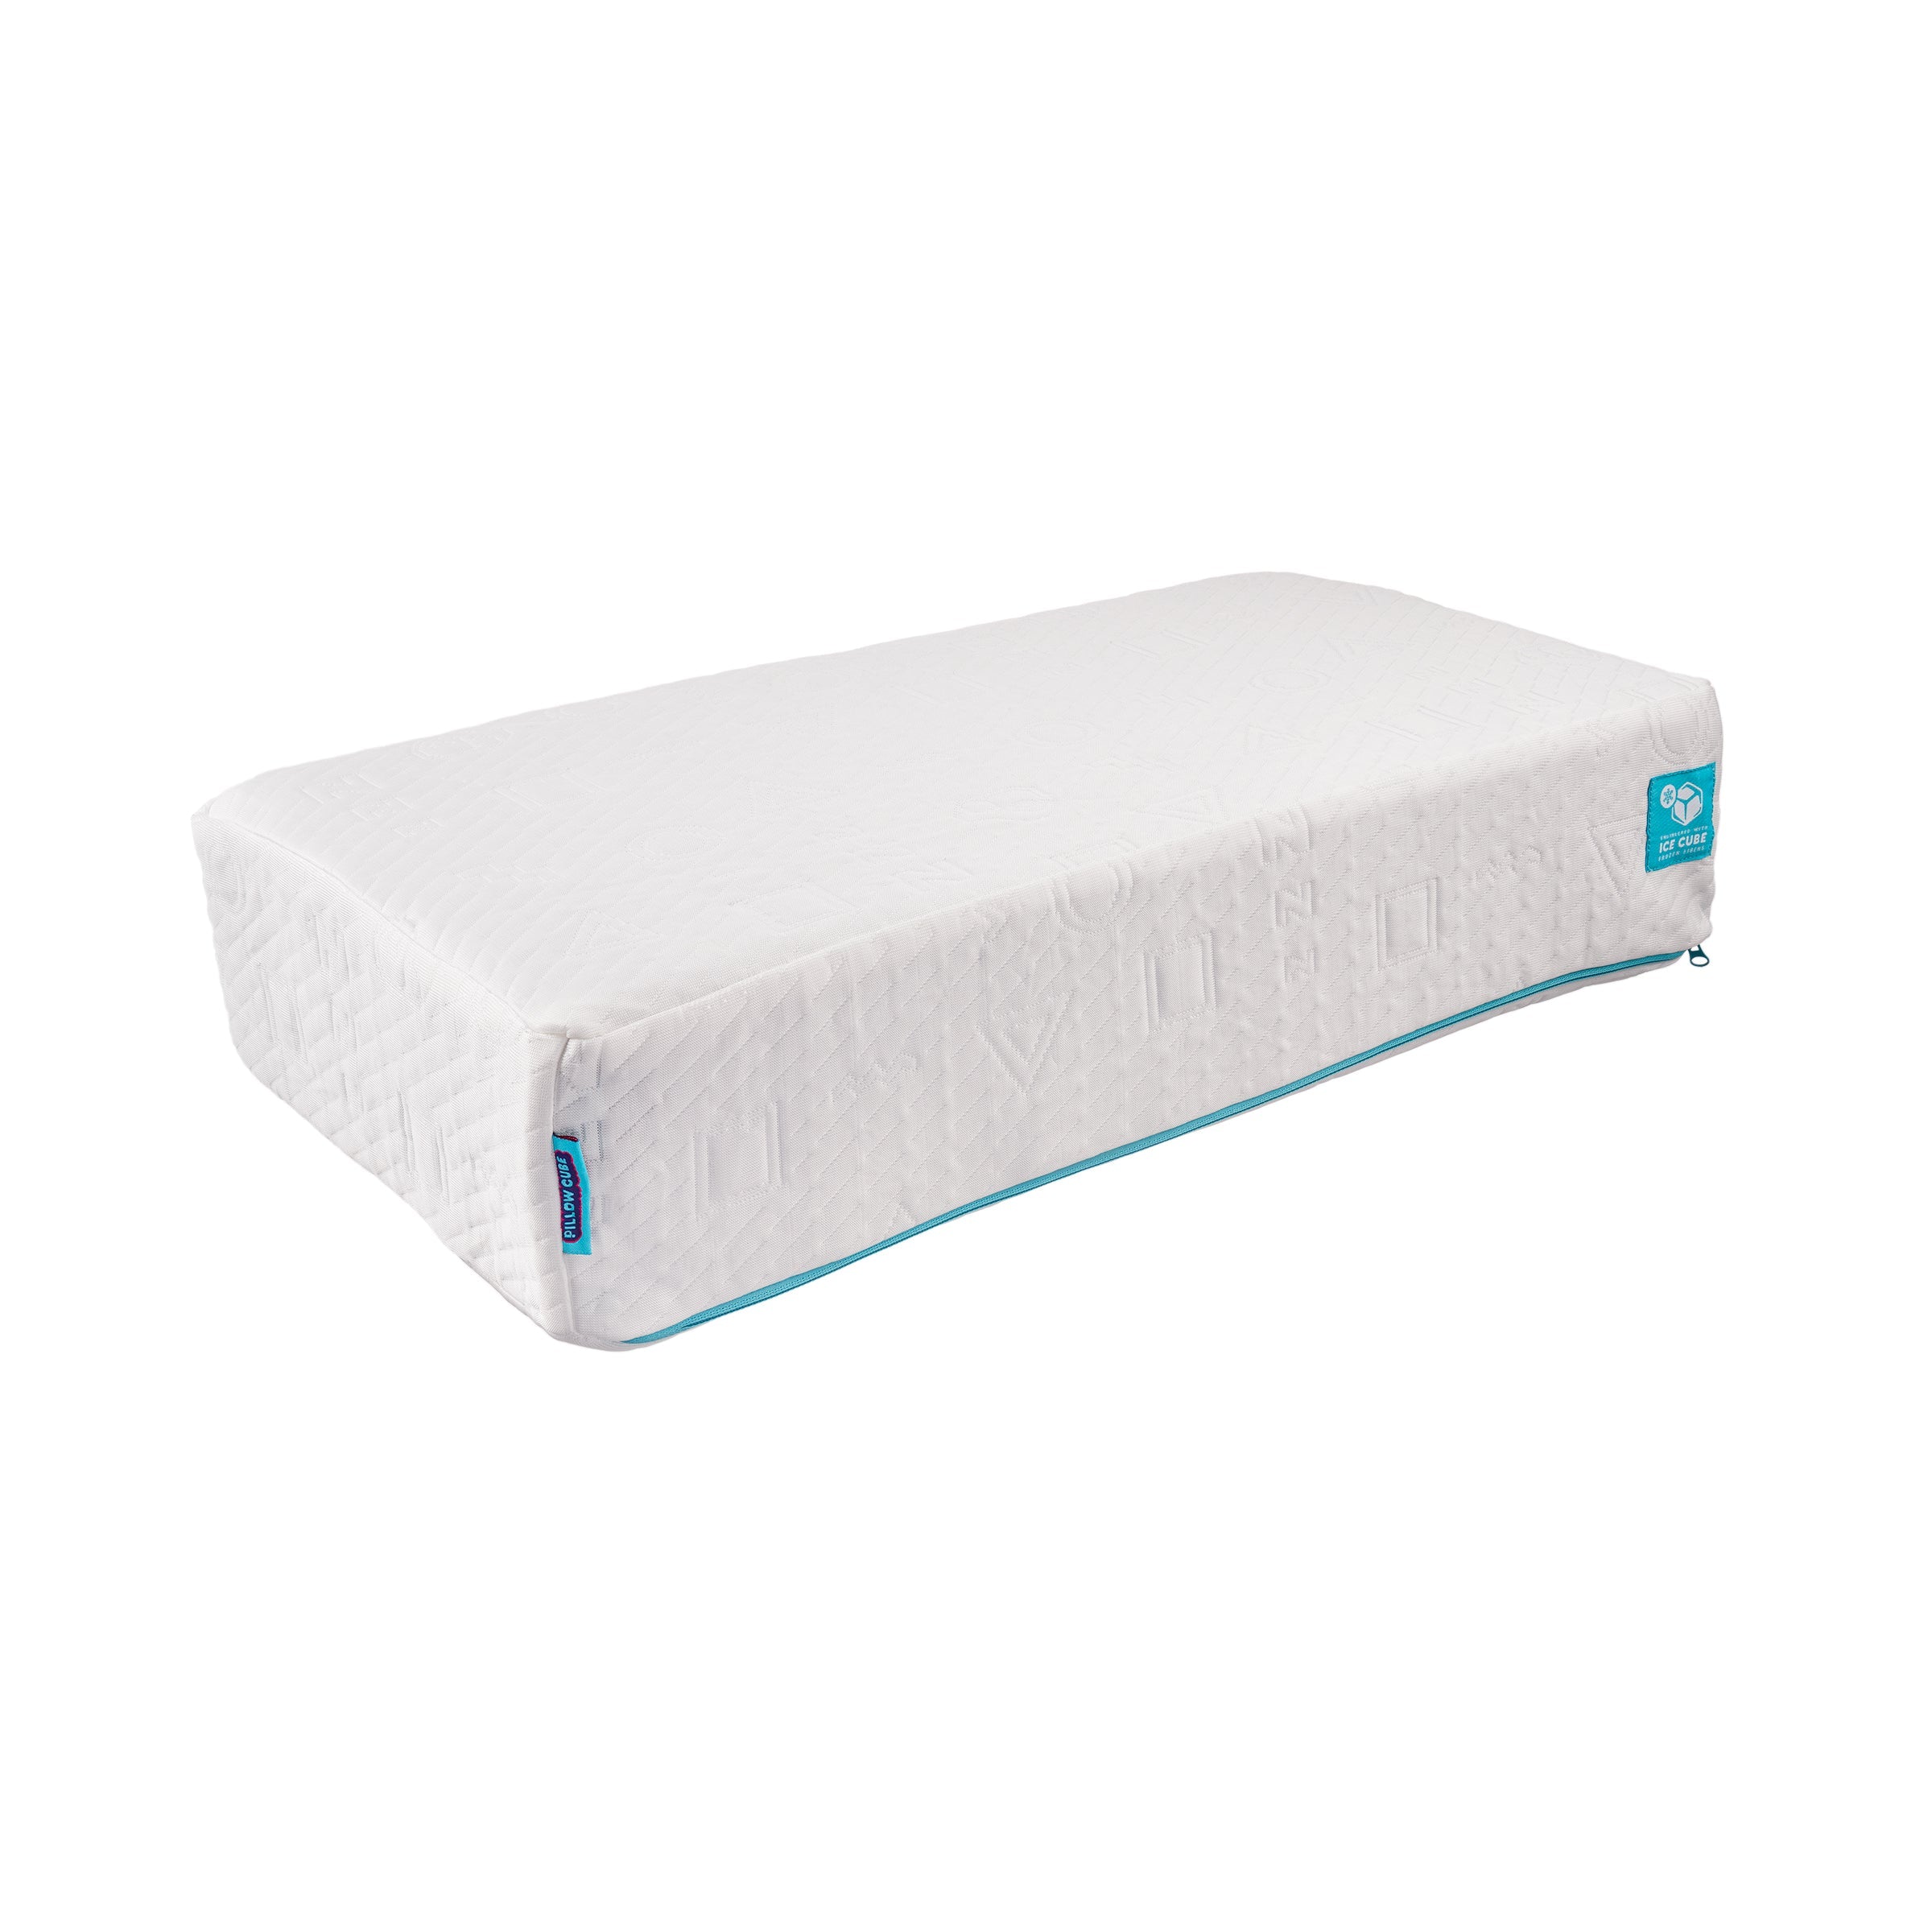 Shop Pillow Cube Ice Cube Cooling Pillow in Boone, Banner Elk Linville —  Blackberry Creek Mattress